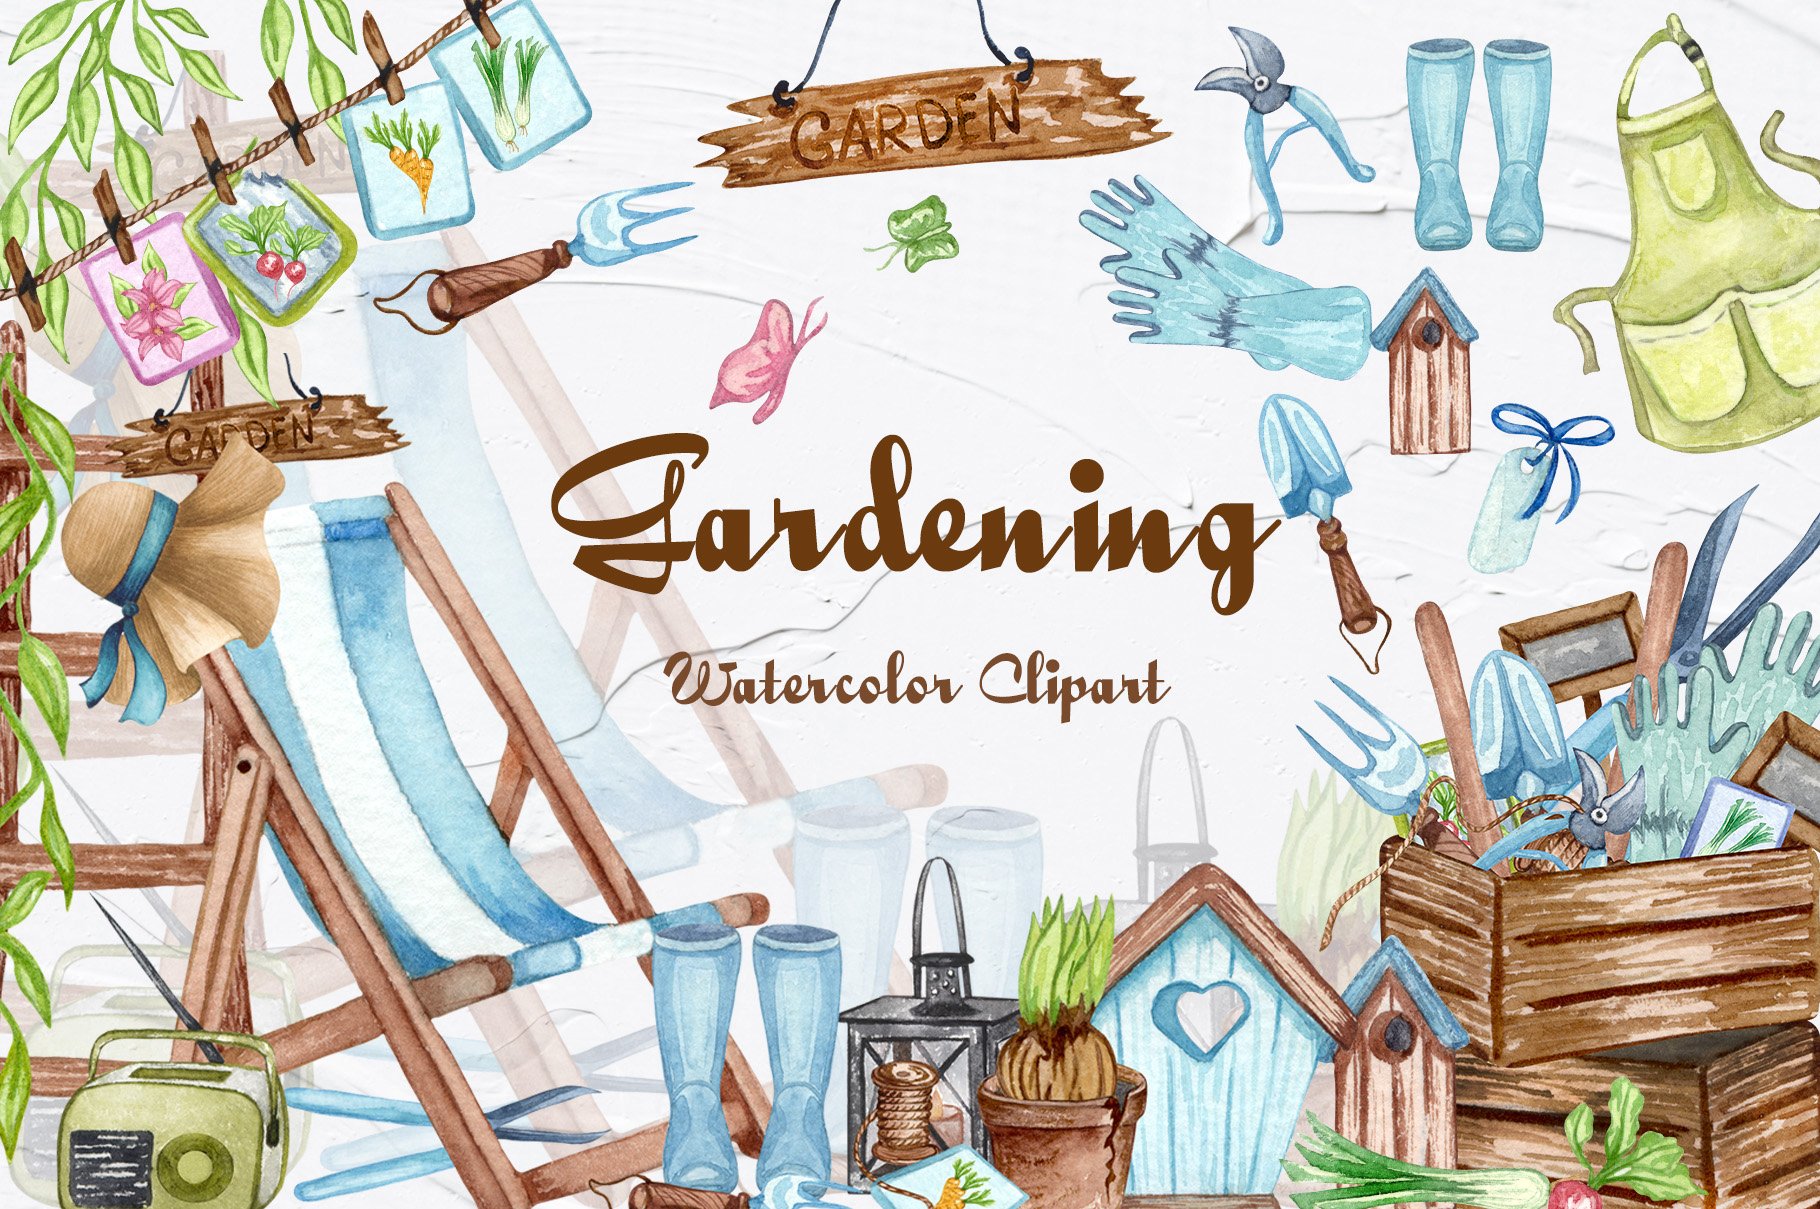 Gardening Watercolor Set cover image.